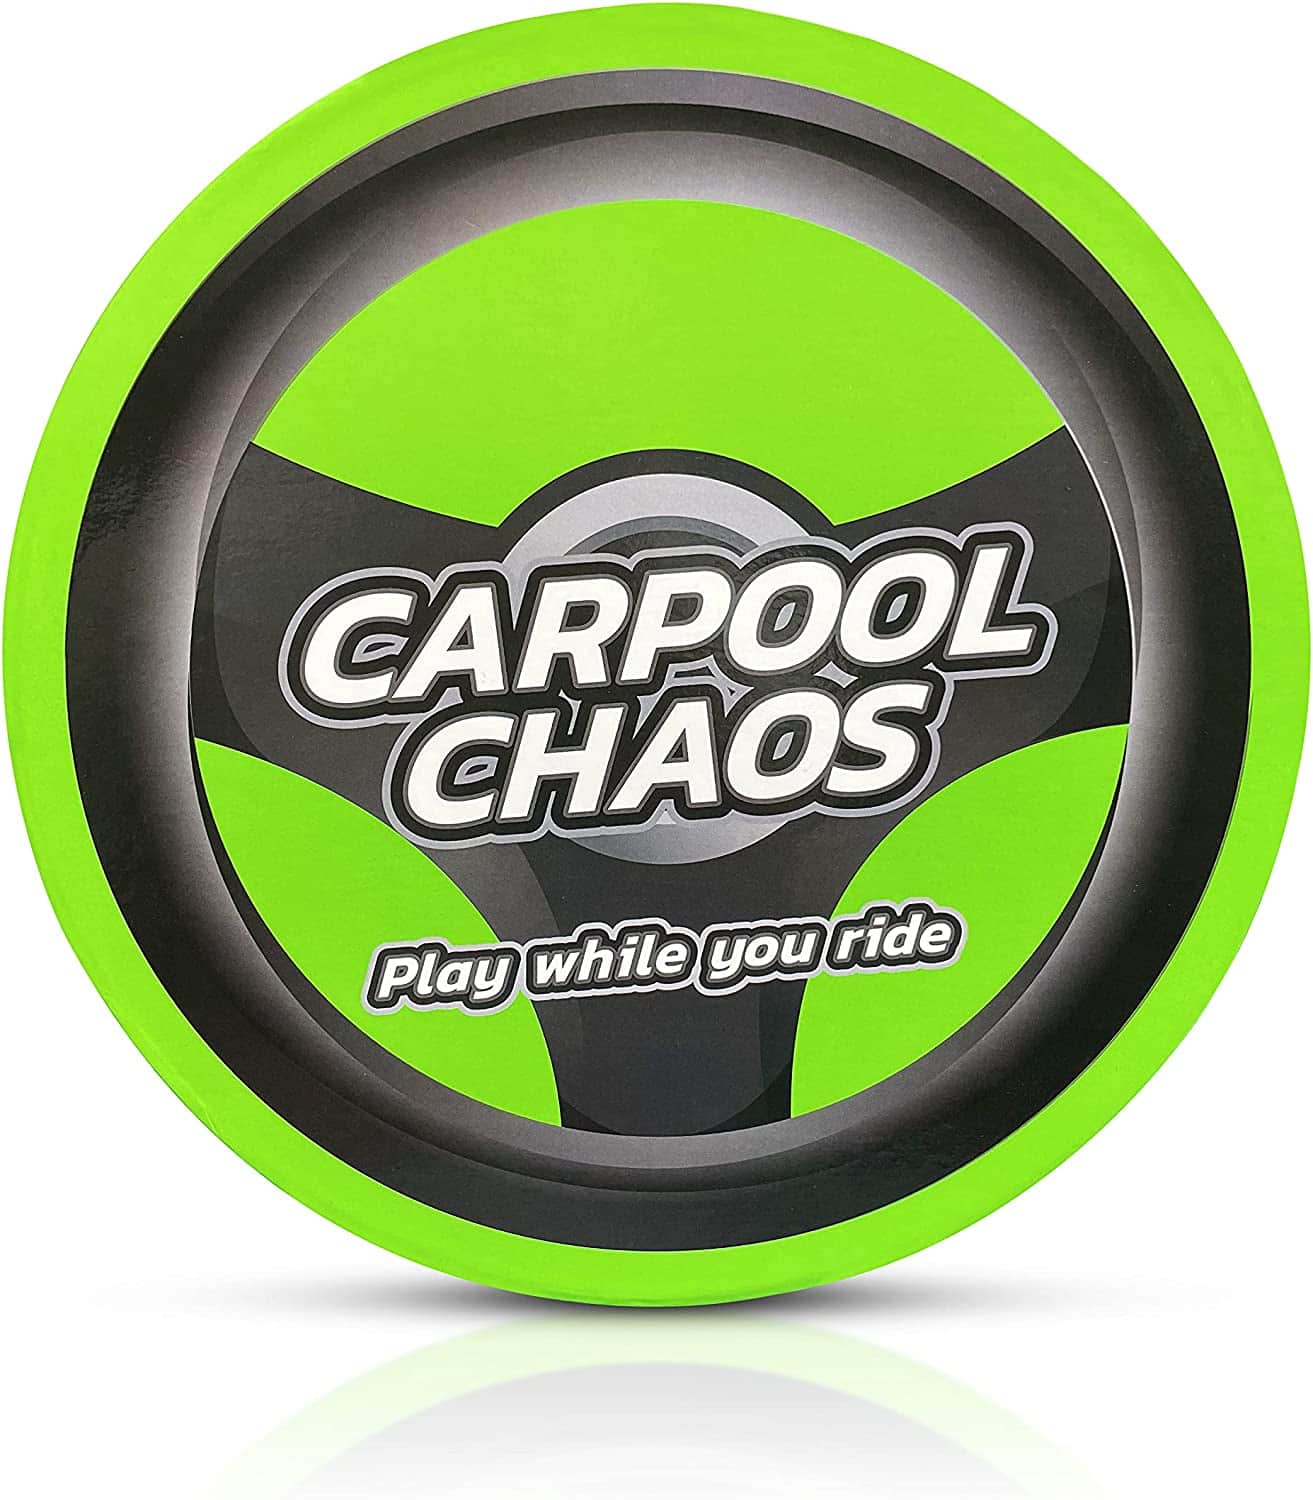 Awesome Gifts For Road Trippers (They’re Practical Too) carpool chaos